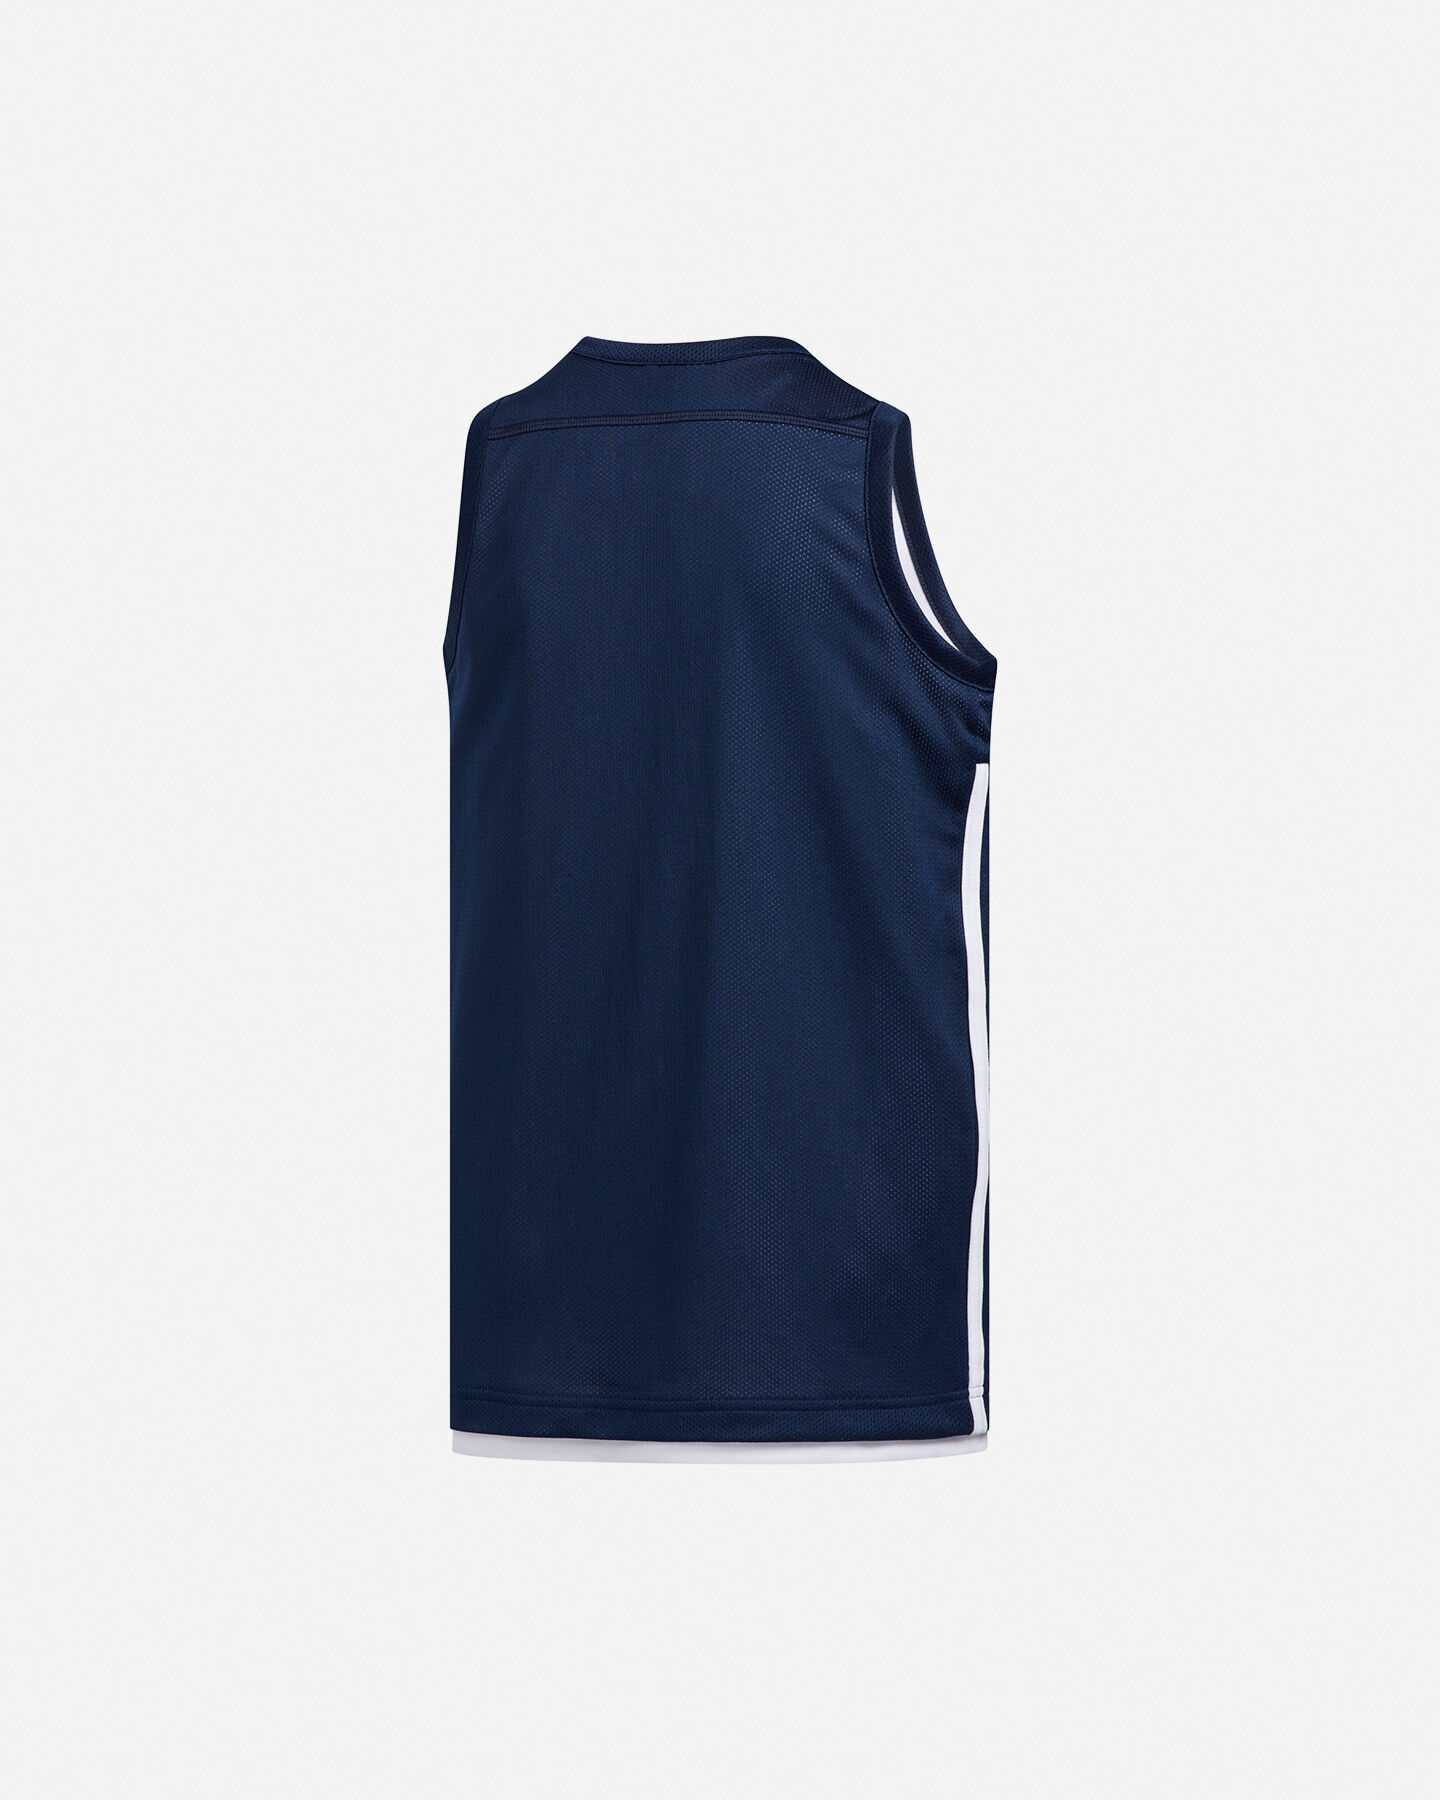  Maglia basket ADIDAS 3G SPEED REVERSIBLE S5066419|UNI|7-8A scatto 1